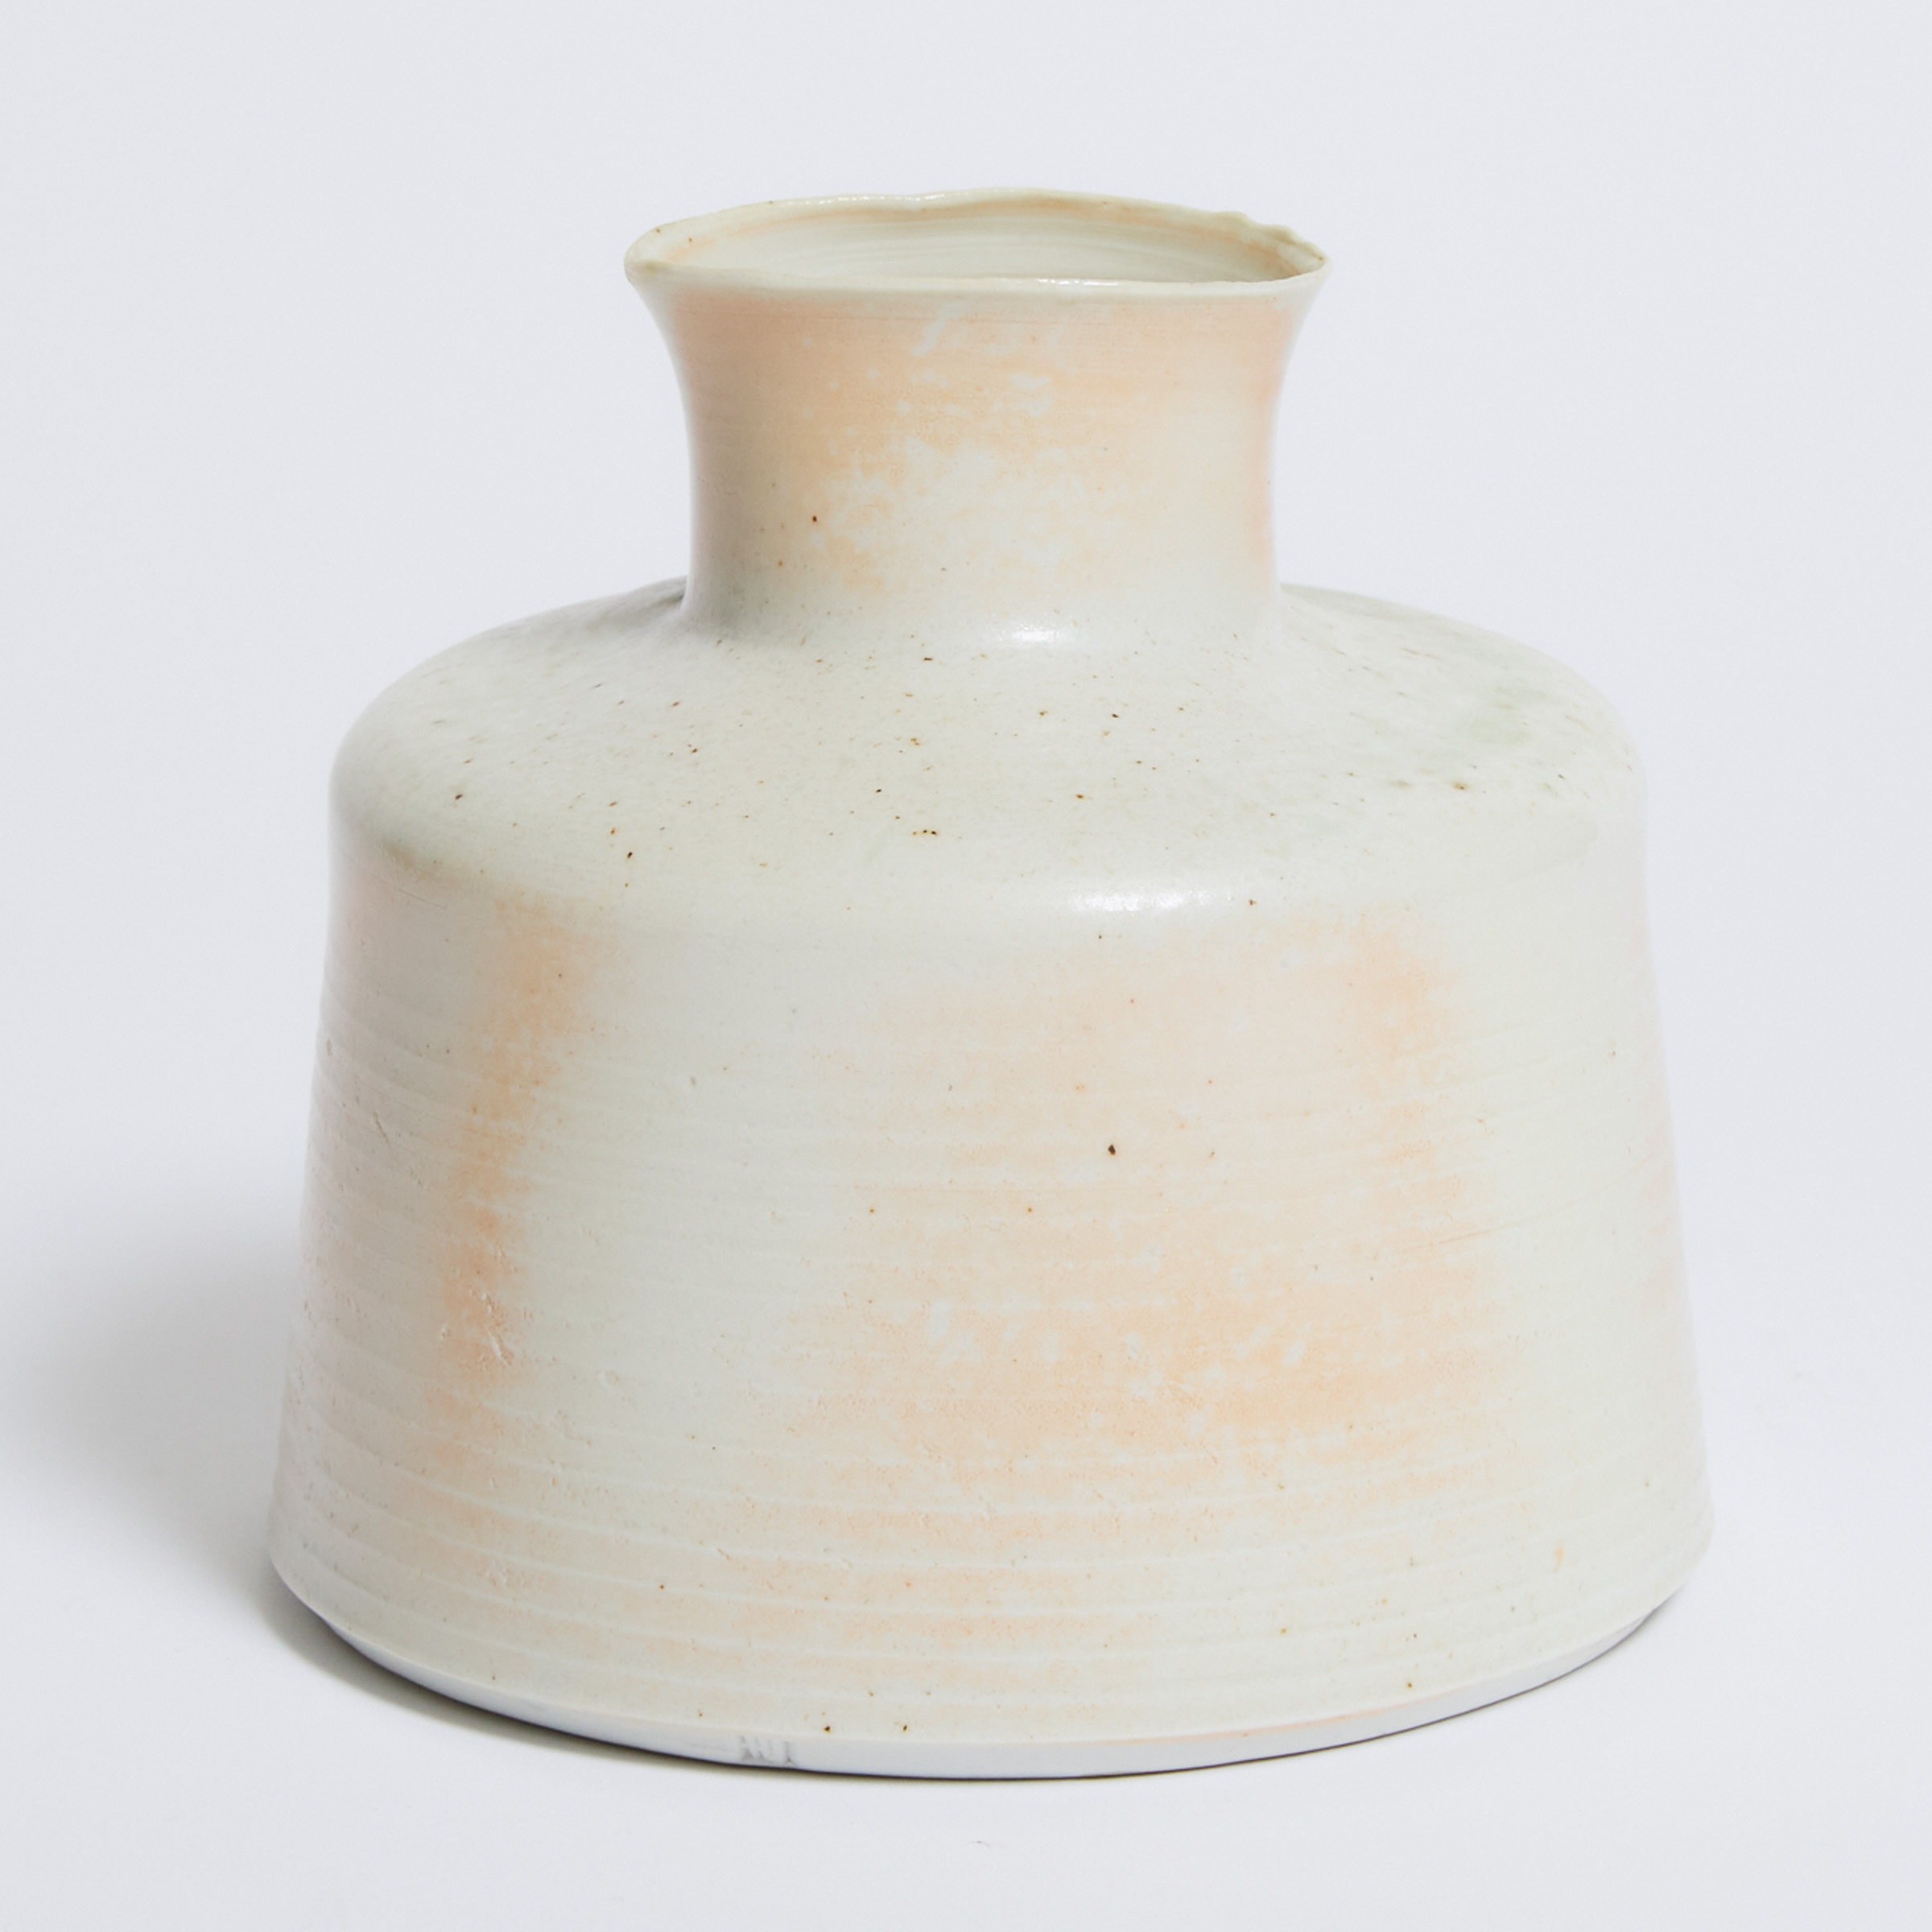 Harlan House (Canadian, b.1943), Mottled Pale Celadon and Coral Glazed Vase, late 20th century